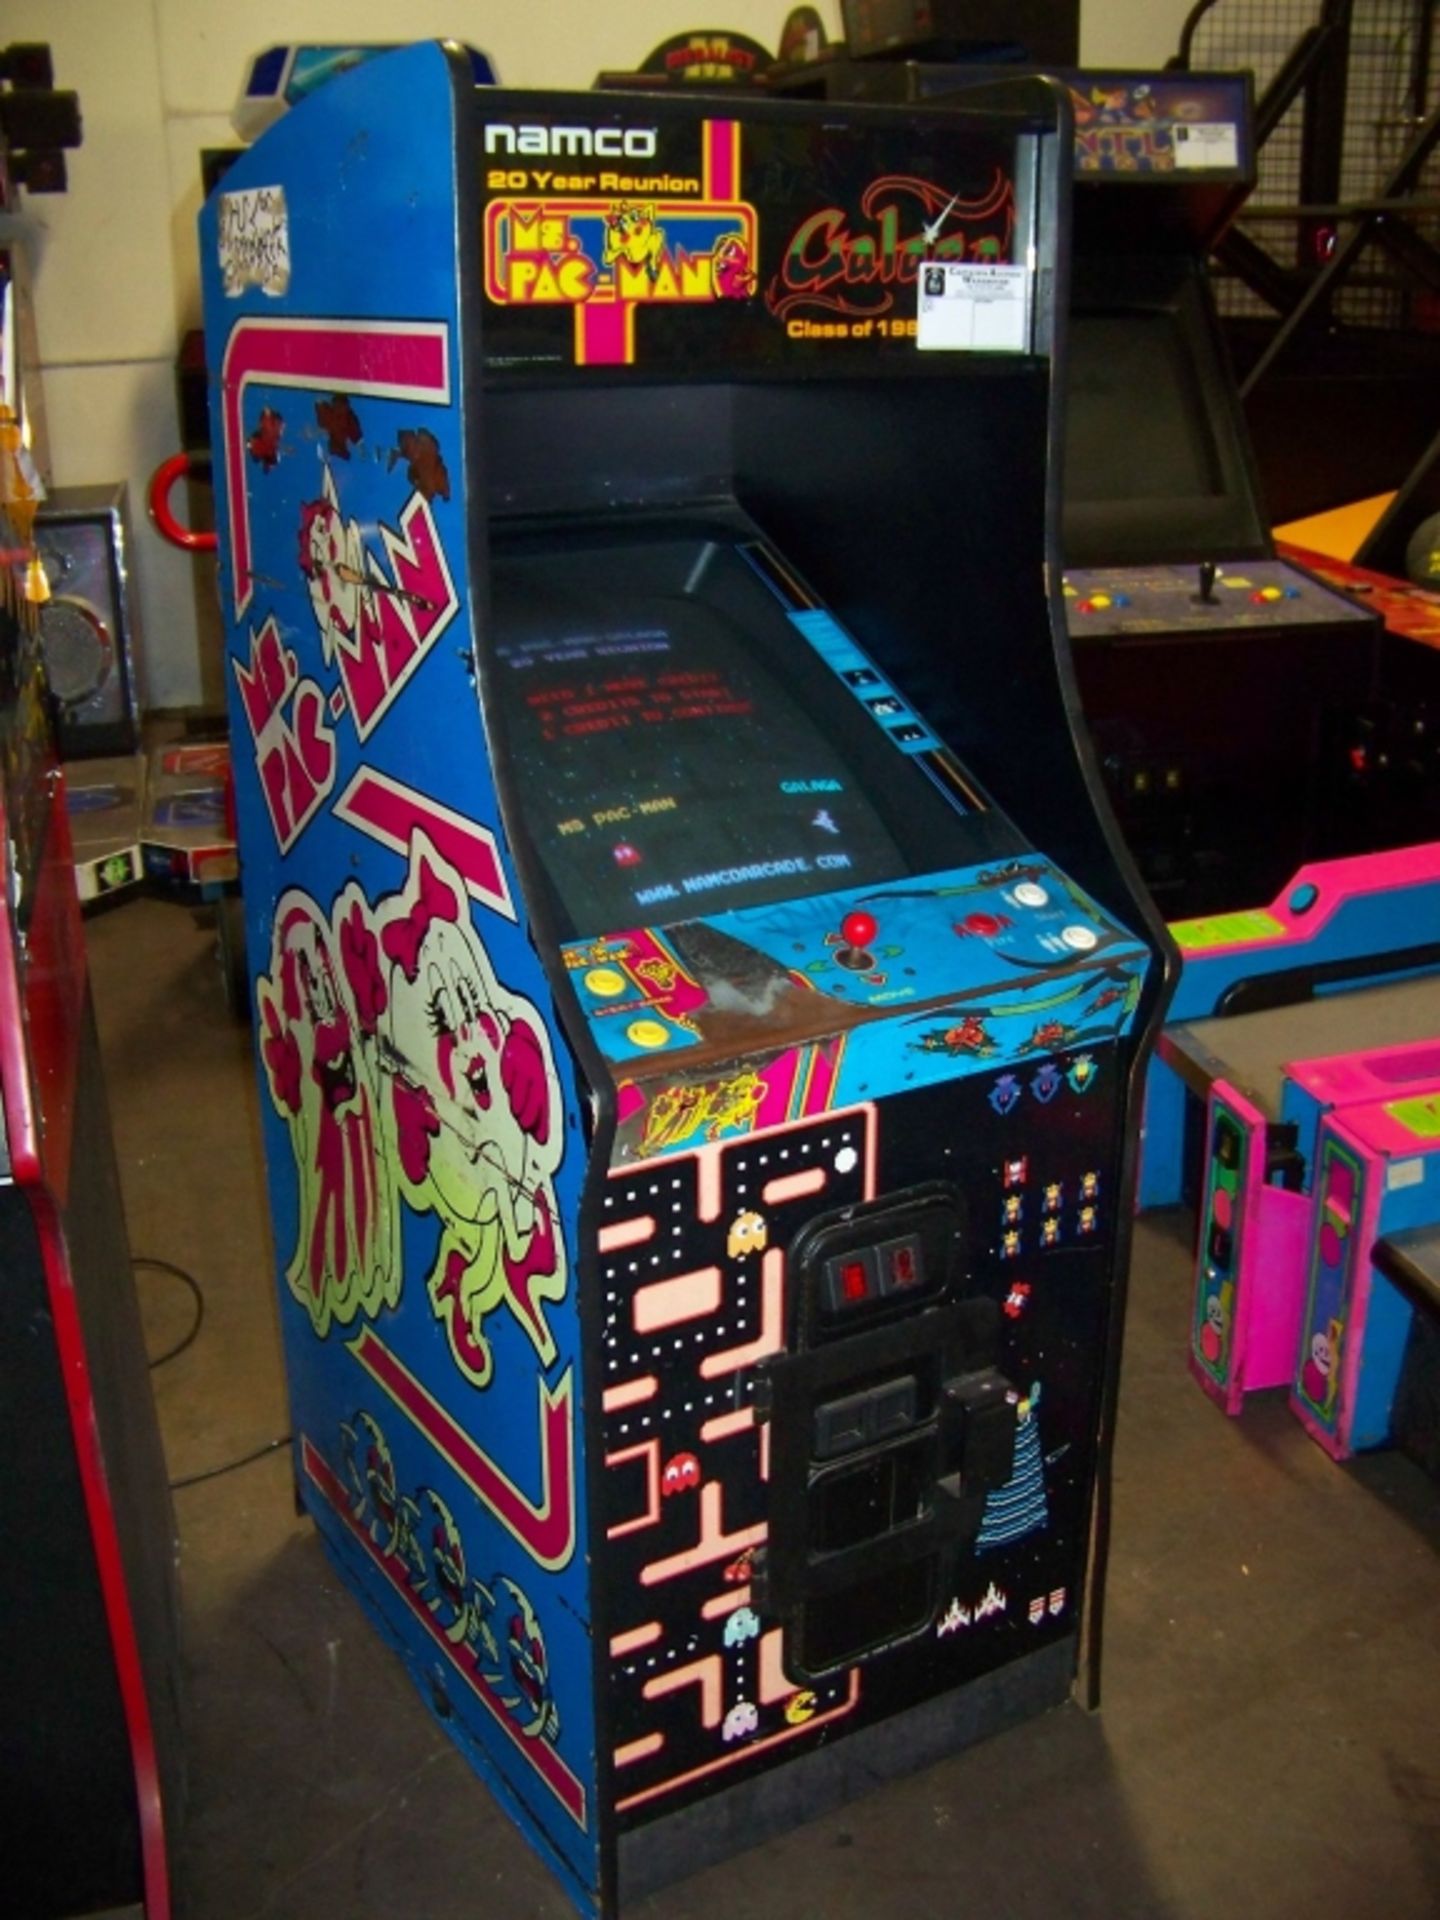 MS PACMAN GALAGA CLASS OF 1981 ARCADE GAME - Image 3 of 6